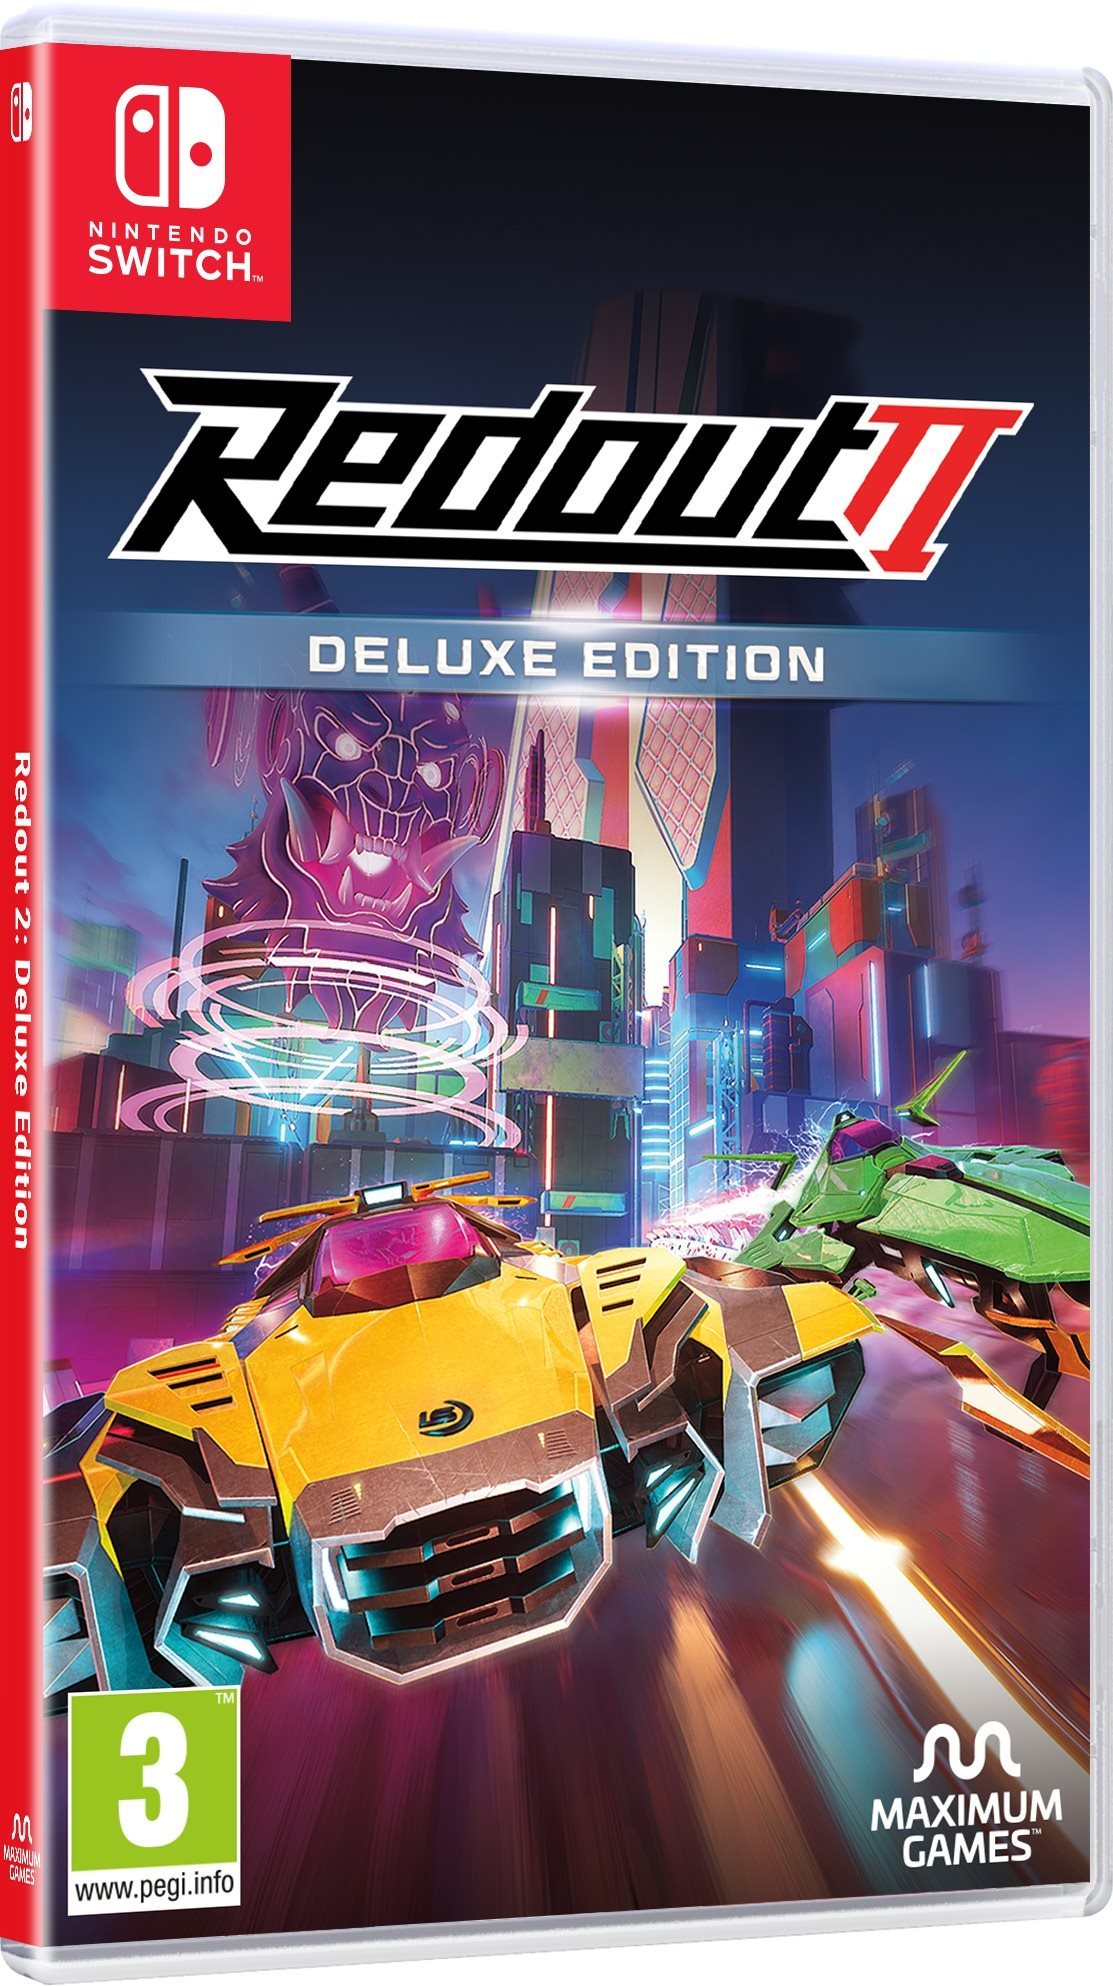 Redout 2 Deluxe Edition - Nintendo Switch